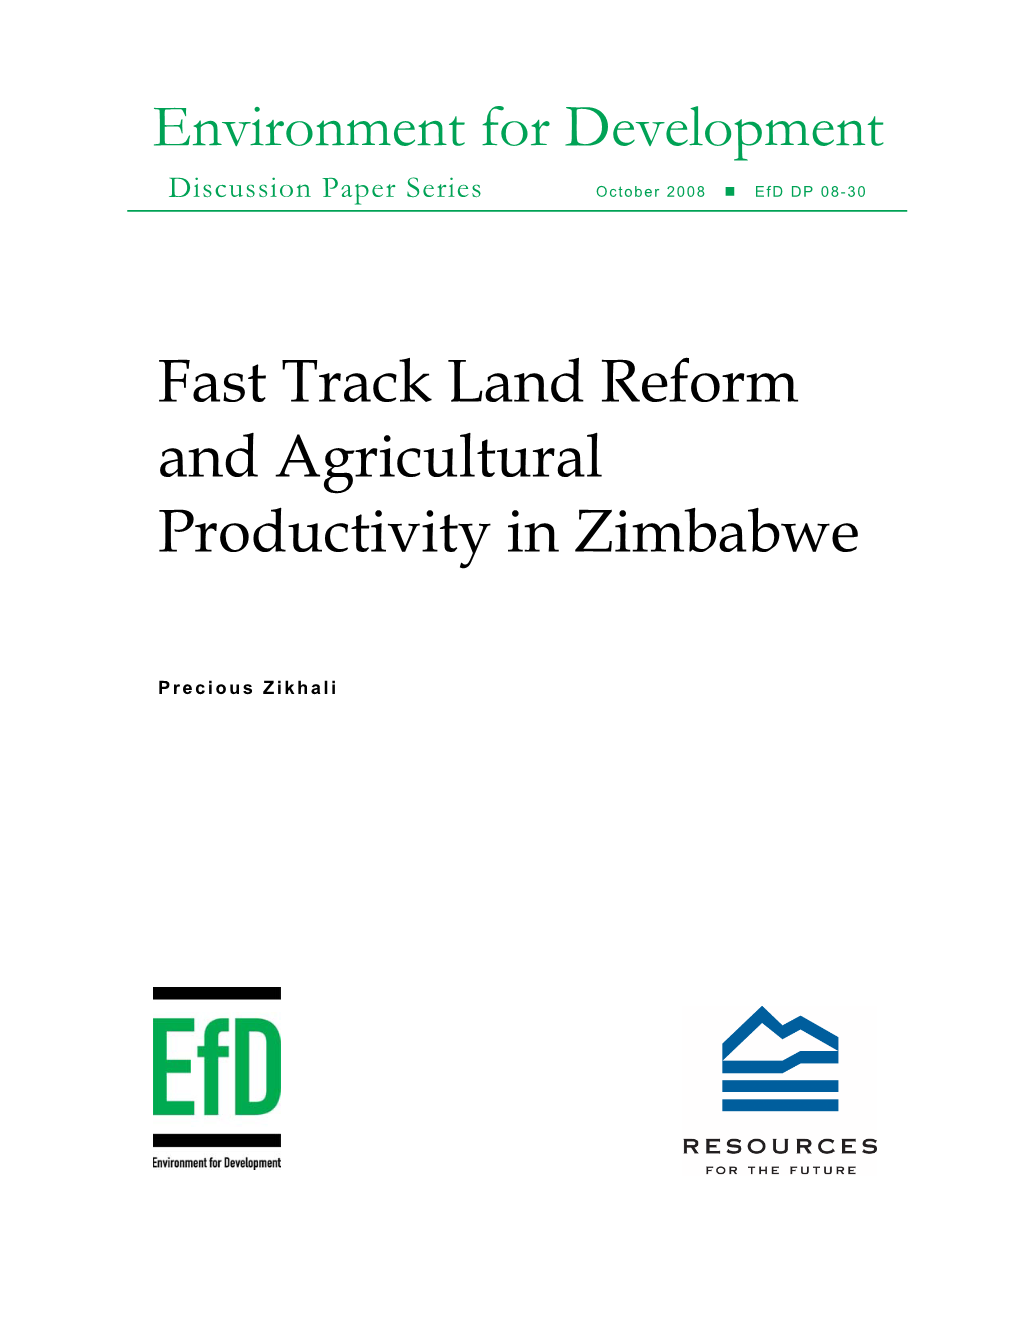 Fast Track Land Reform and Agricultural Productivity in Zimbabwe